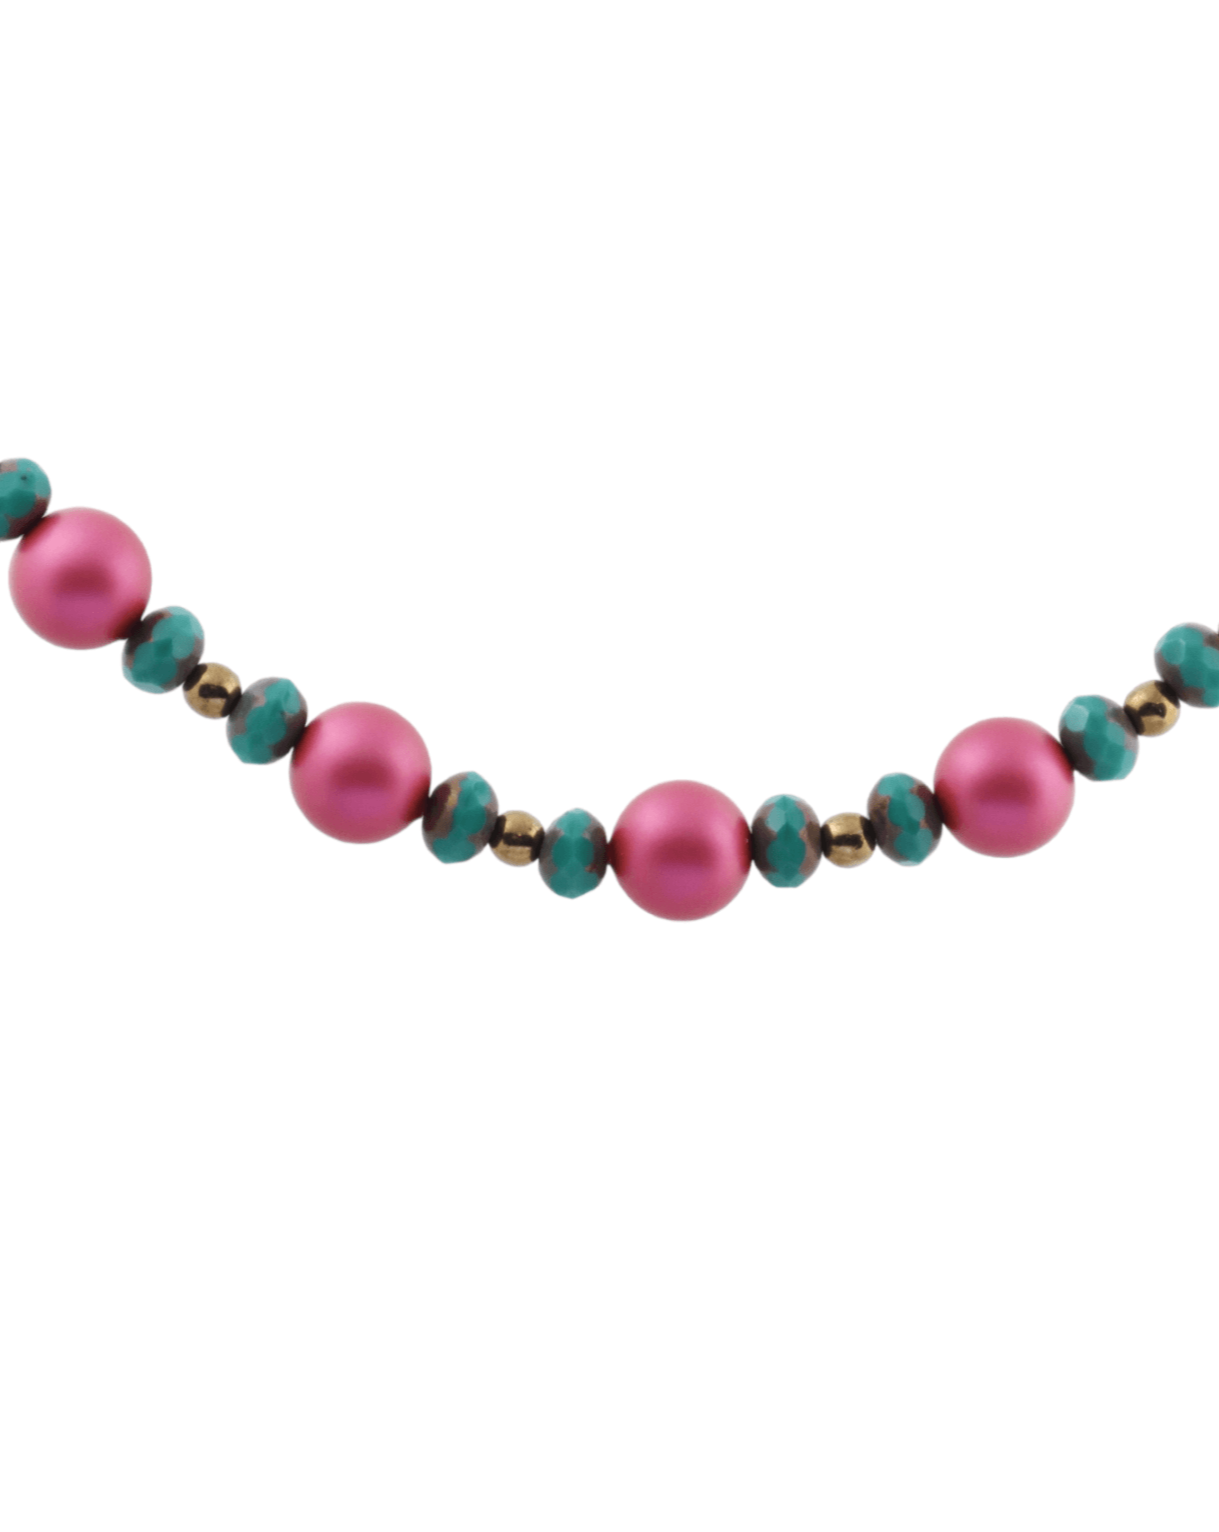 Buy Elegant Pink Color Beads Necklace Chains Online In India At Discounted  Prices